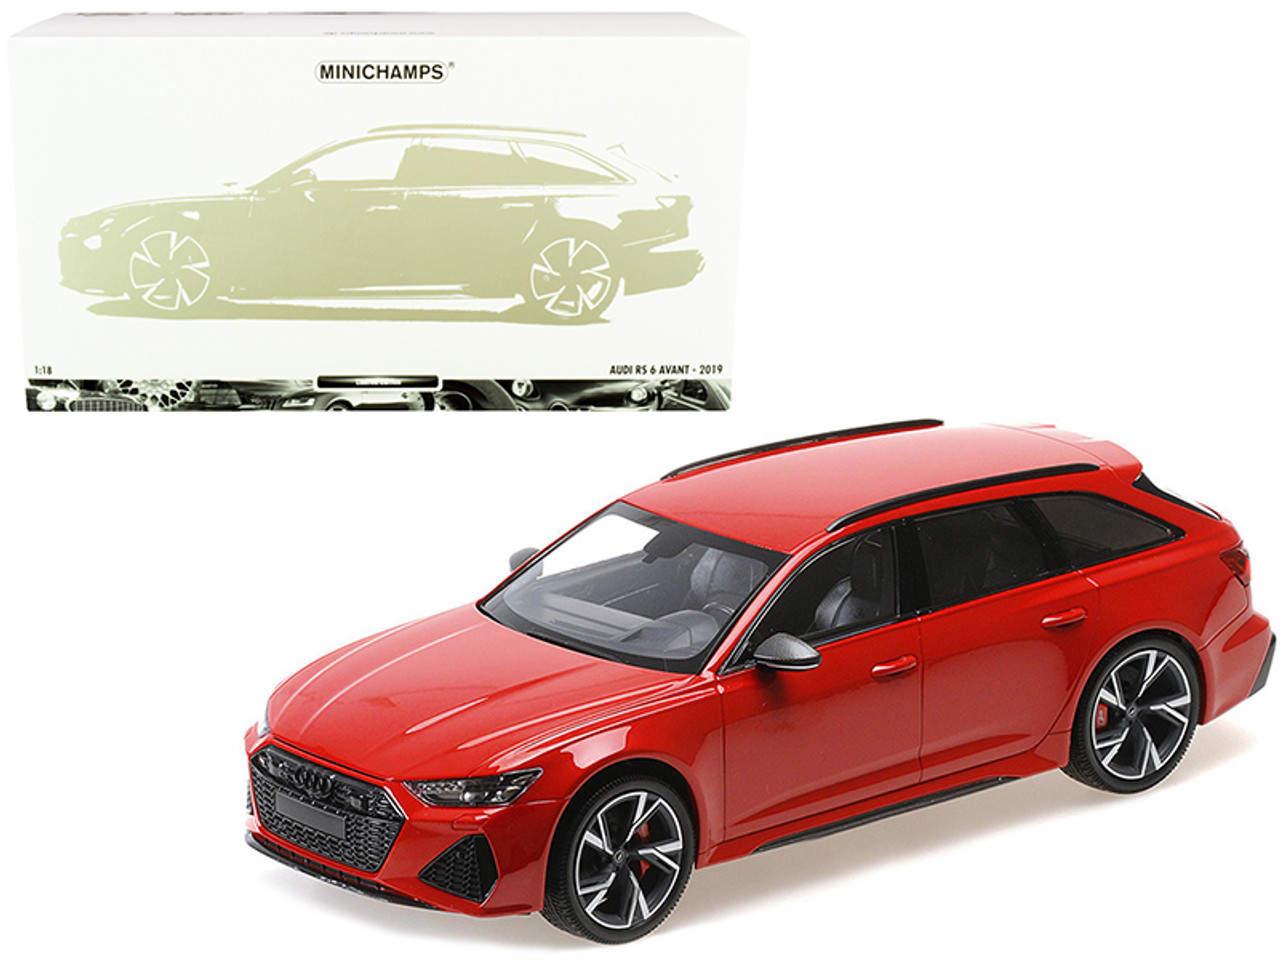 2019 Audi RS 6 Avant Red Metallic Limited Edition to 300 pieces Worldwide 1/18 Diecast Model Car by Minichamps